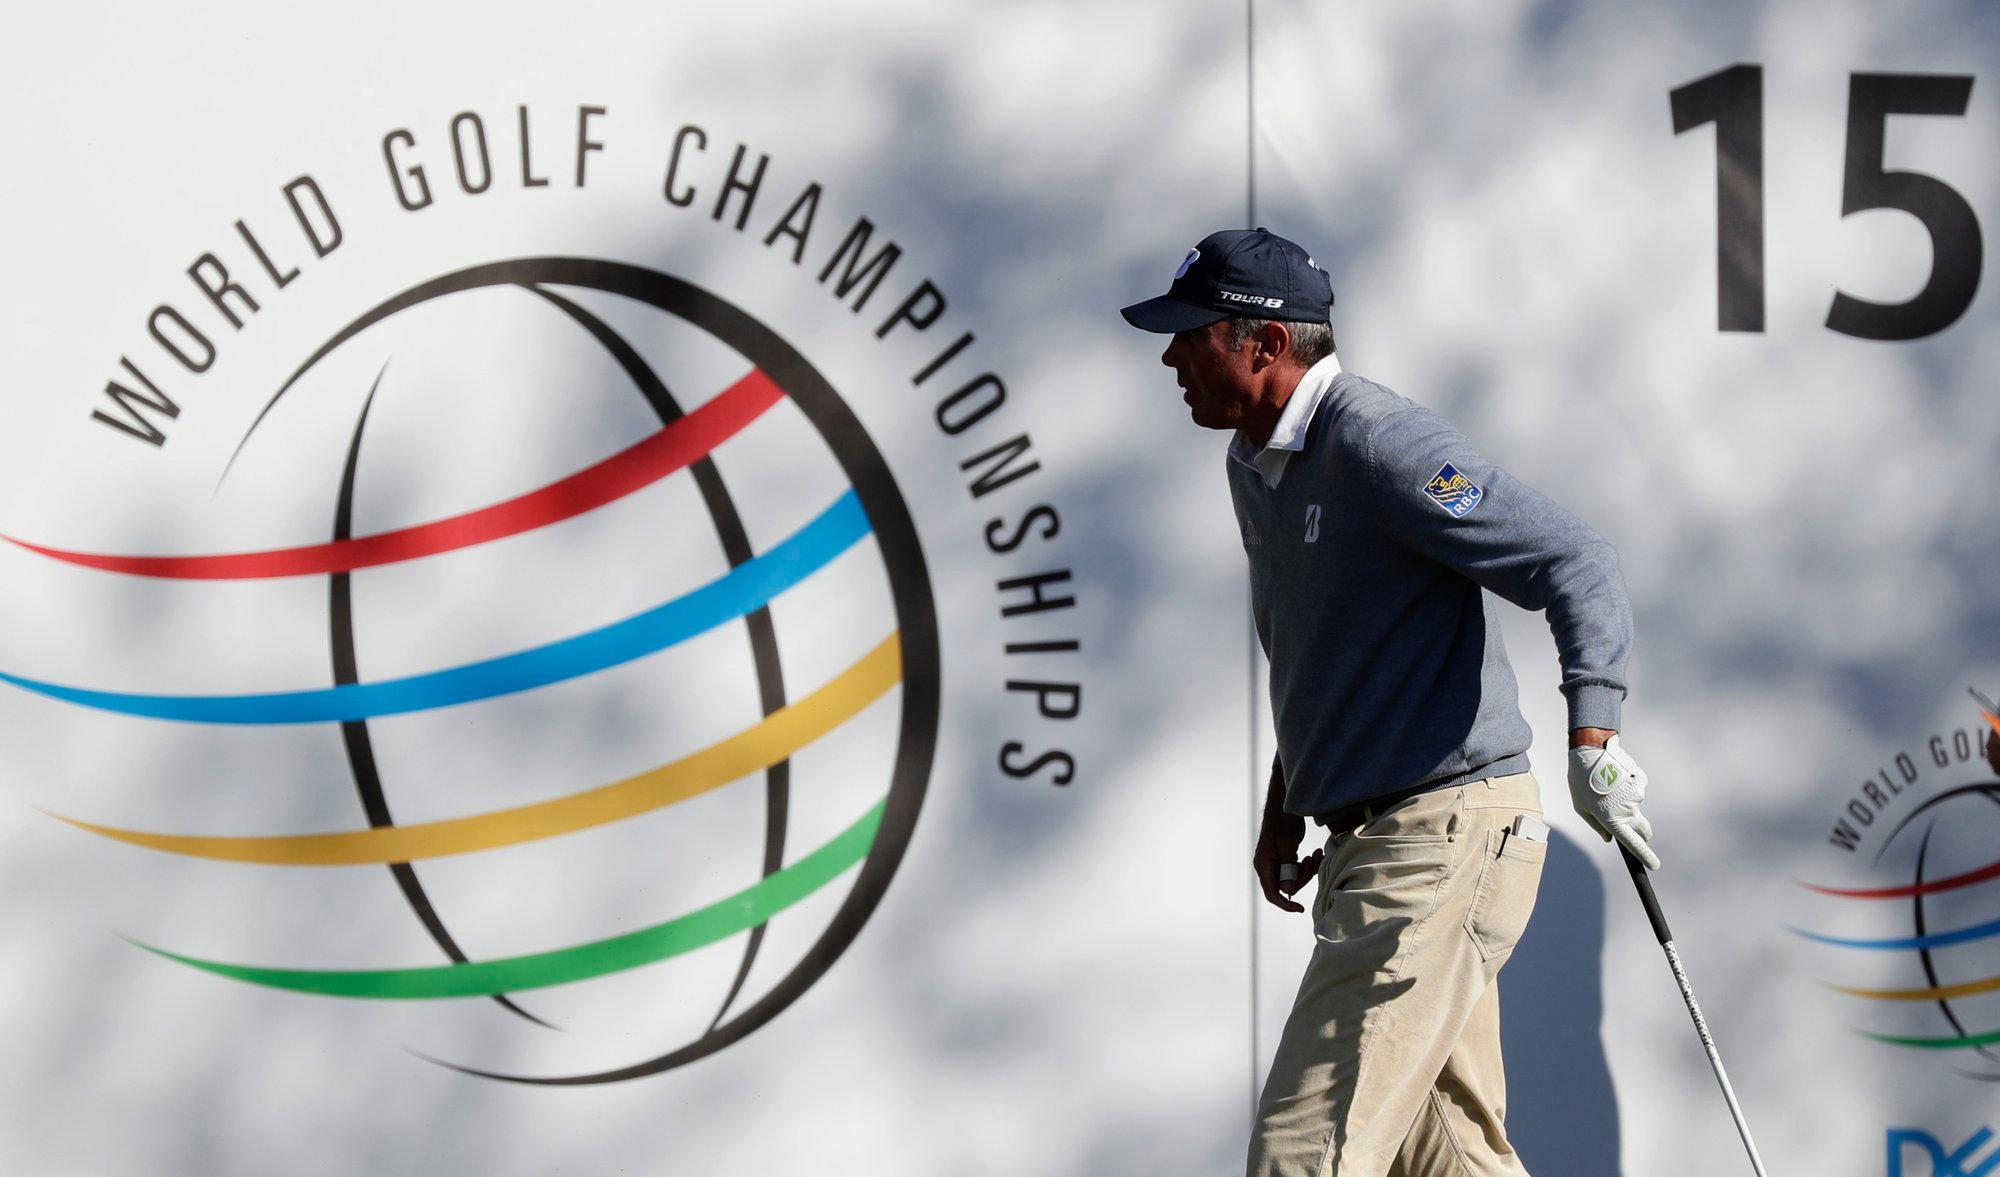 WGC-Dell Technologies Match Play Betting Preview: The Golf World Joins the Madness